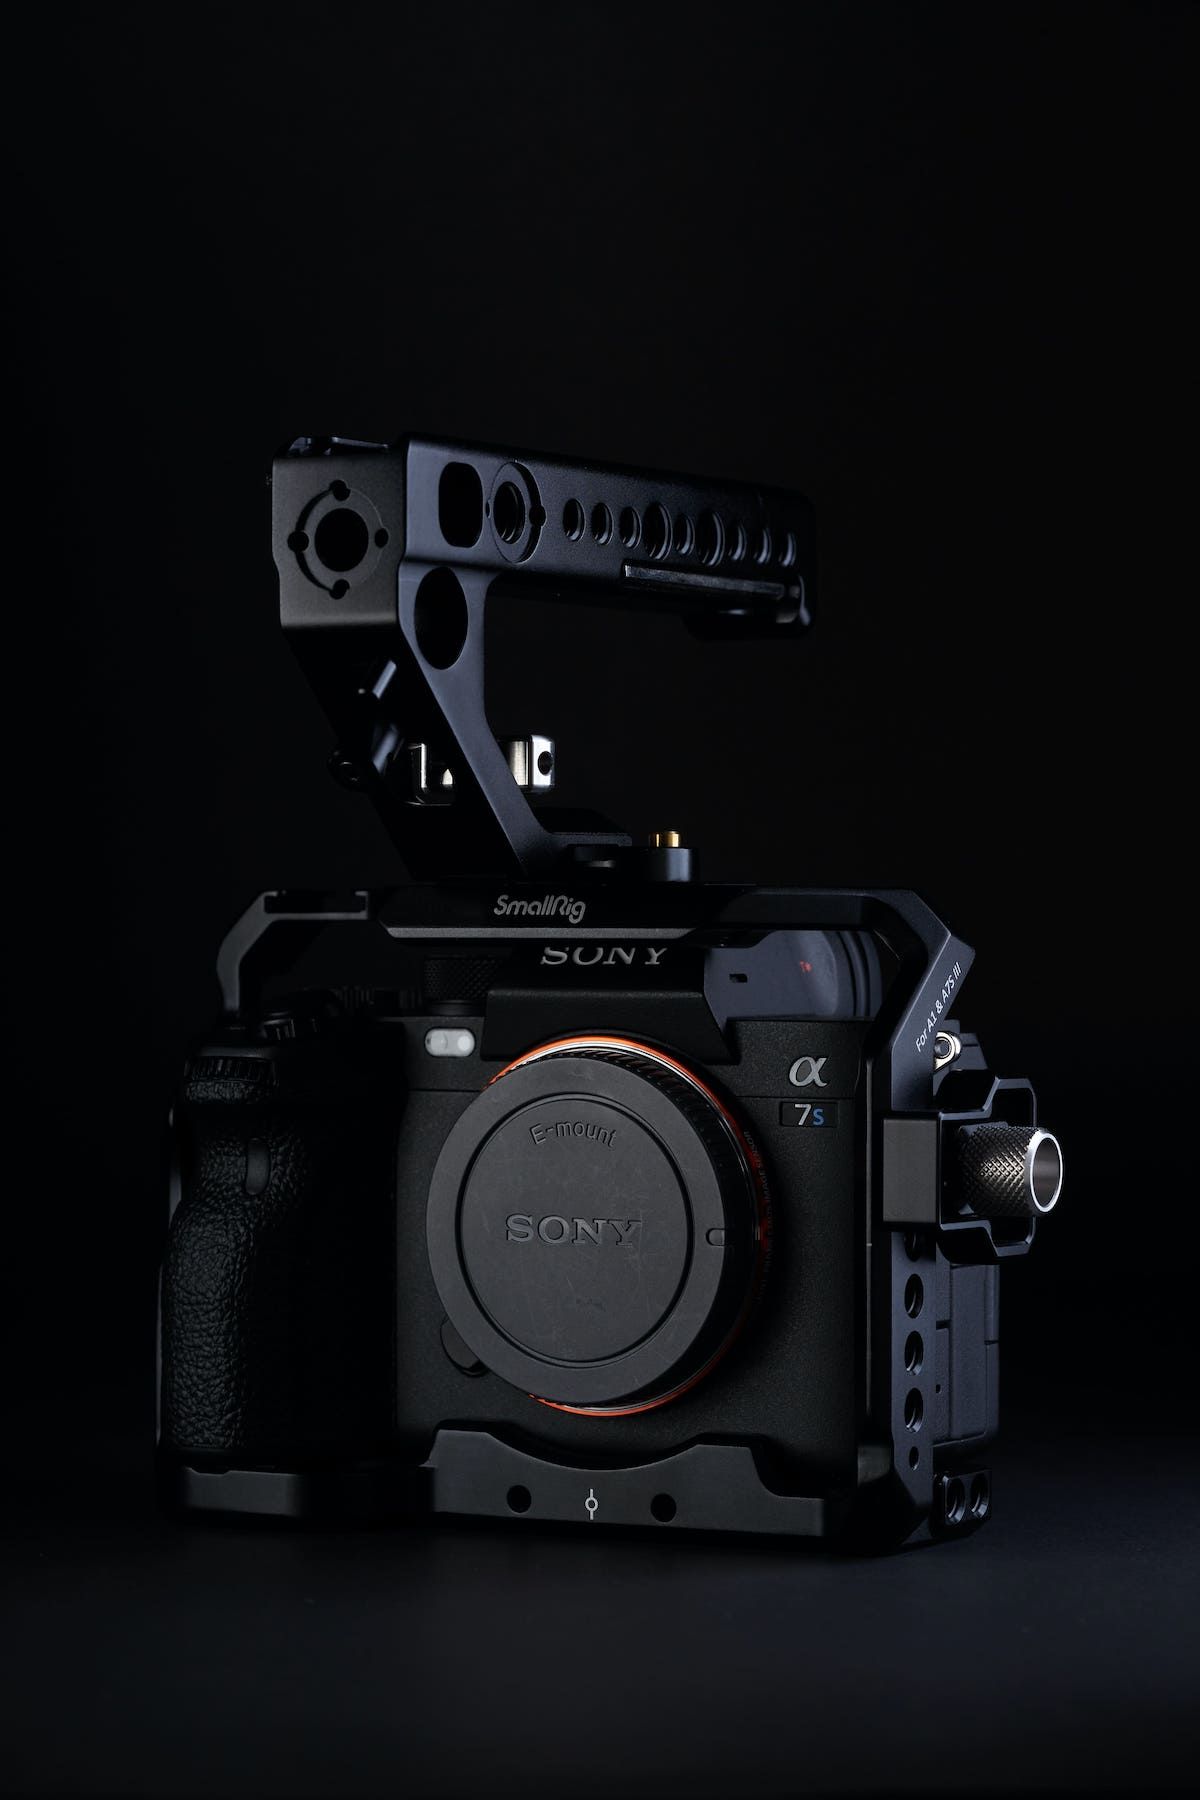 Sony a7s design and handling